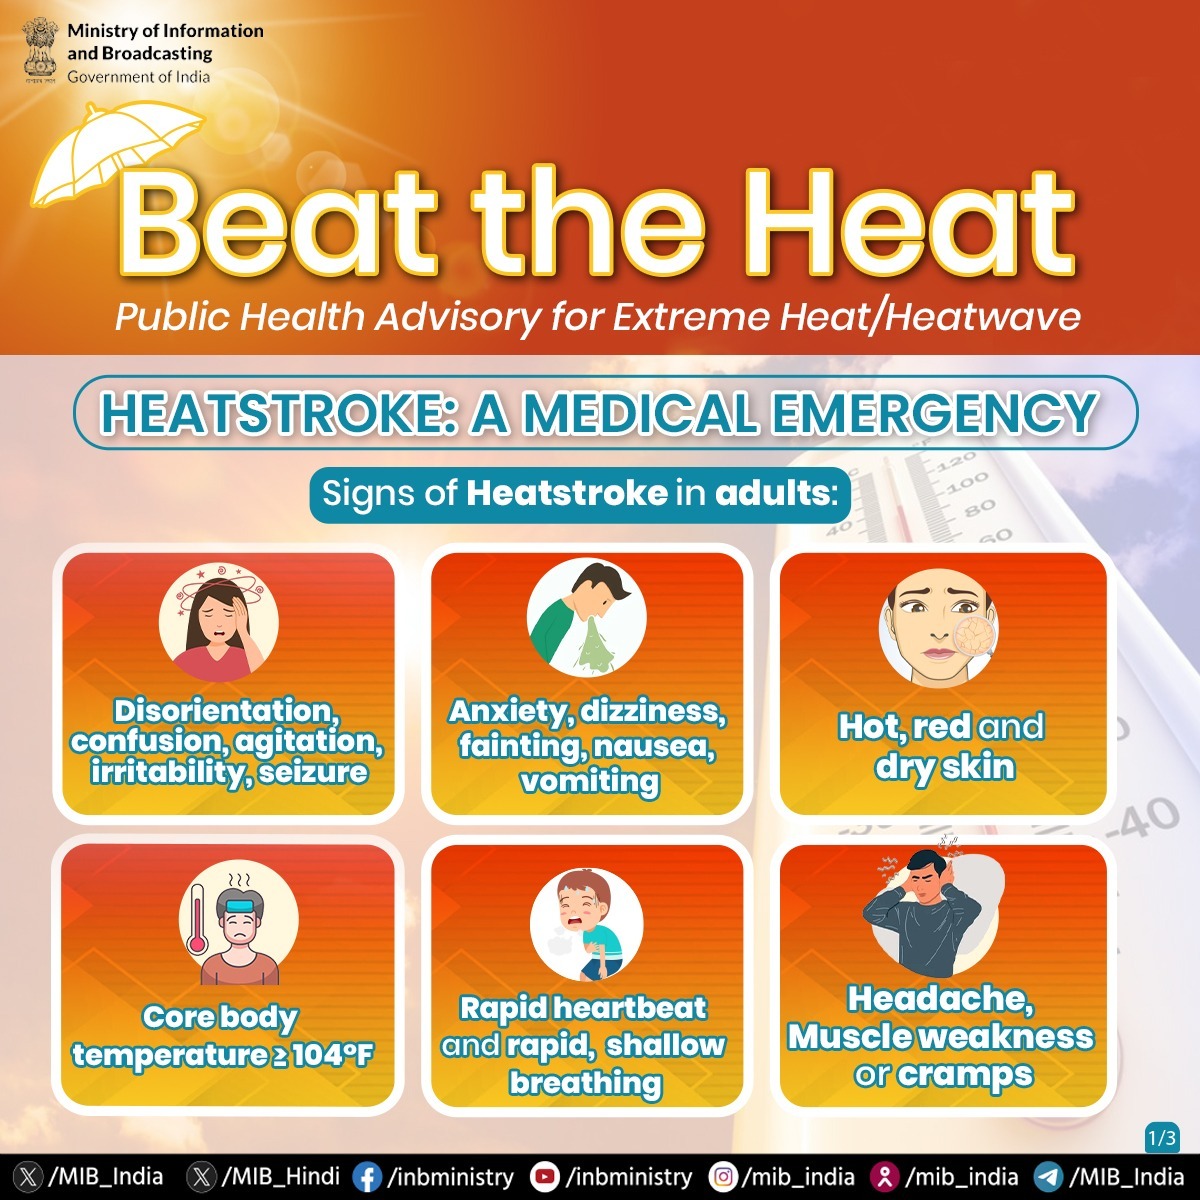 #HeatWave: Beat the Heat! 📝Public Health Advisory for Extreme Heat/Heatwave☀️ ➡️Heatstroke: A medical emergency Signs of heatstroke in adults: 💠Disorientation, confusion, agitation, irritability, seizure 💠Anxiety, dizziness, fainting, nausea, vomiting 💠Hot, red and dry…